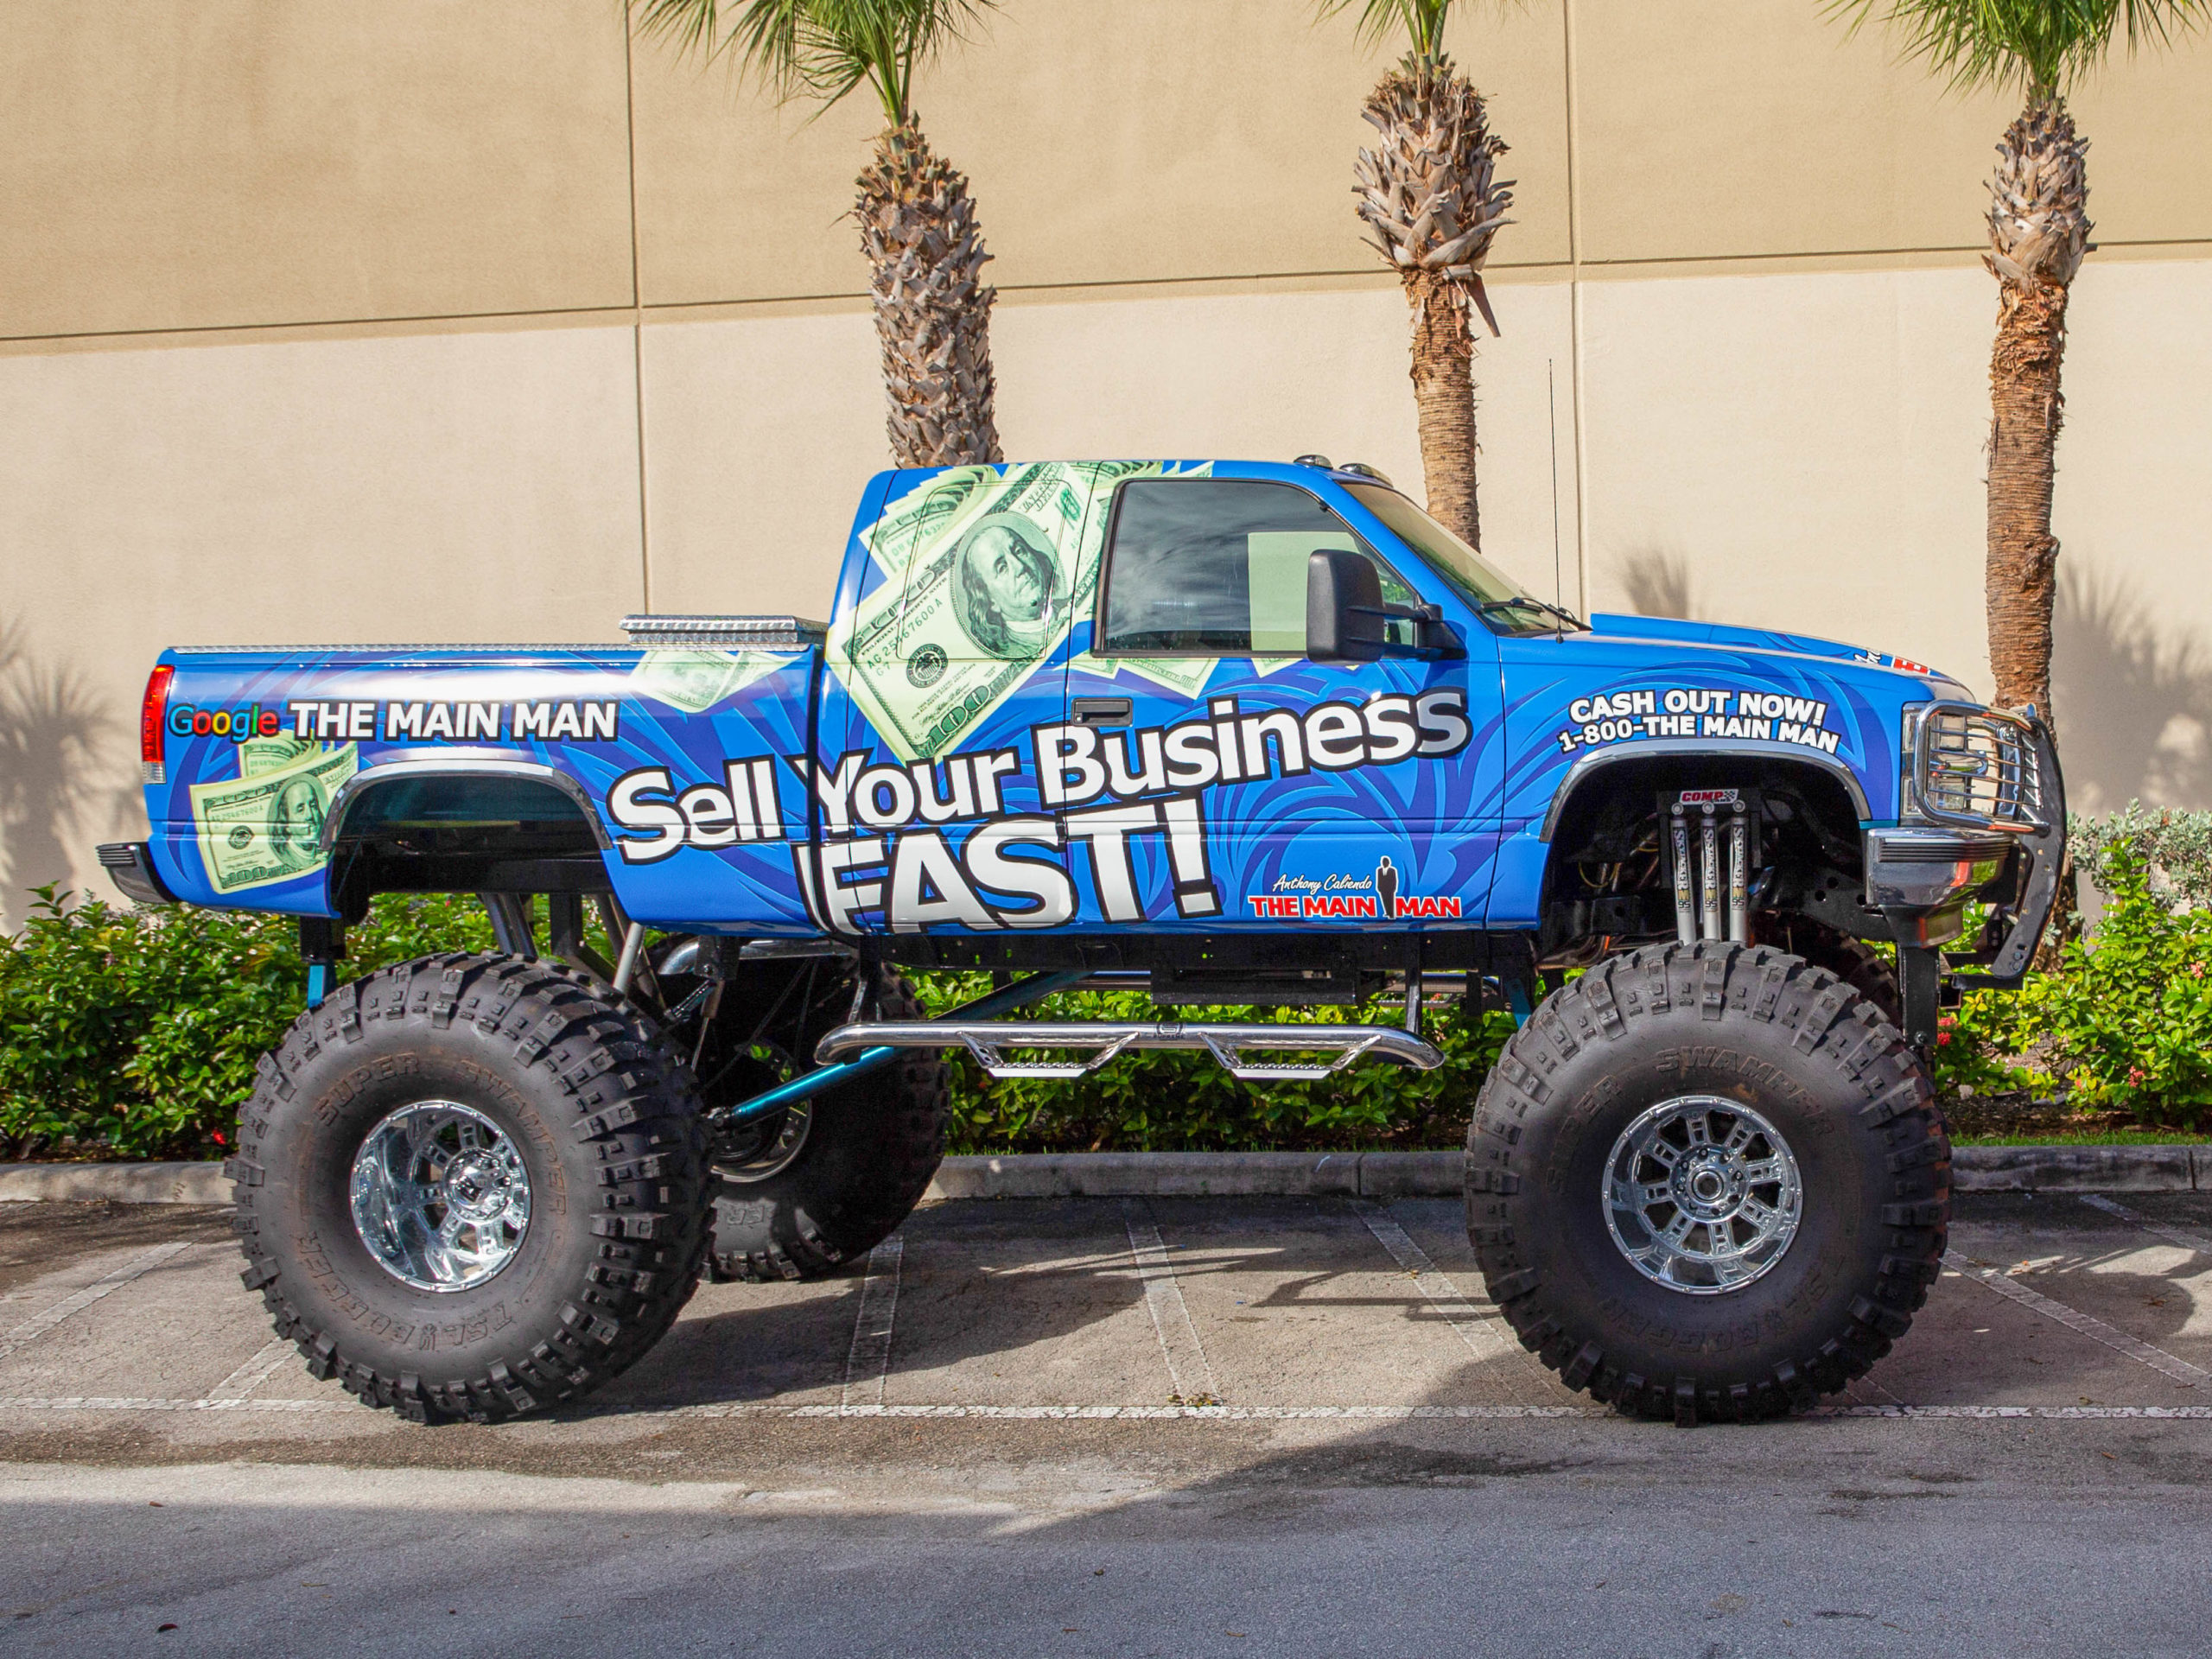 A monster truck vehicle wrap for The Main Man company